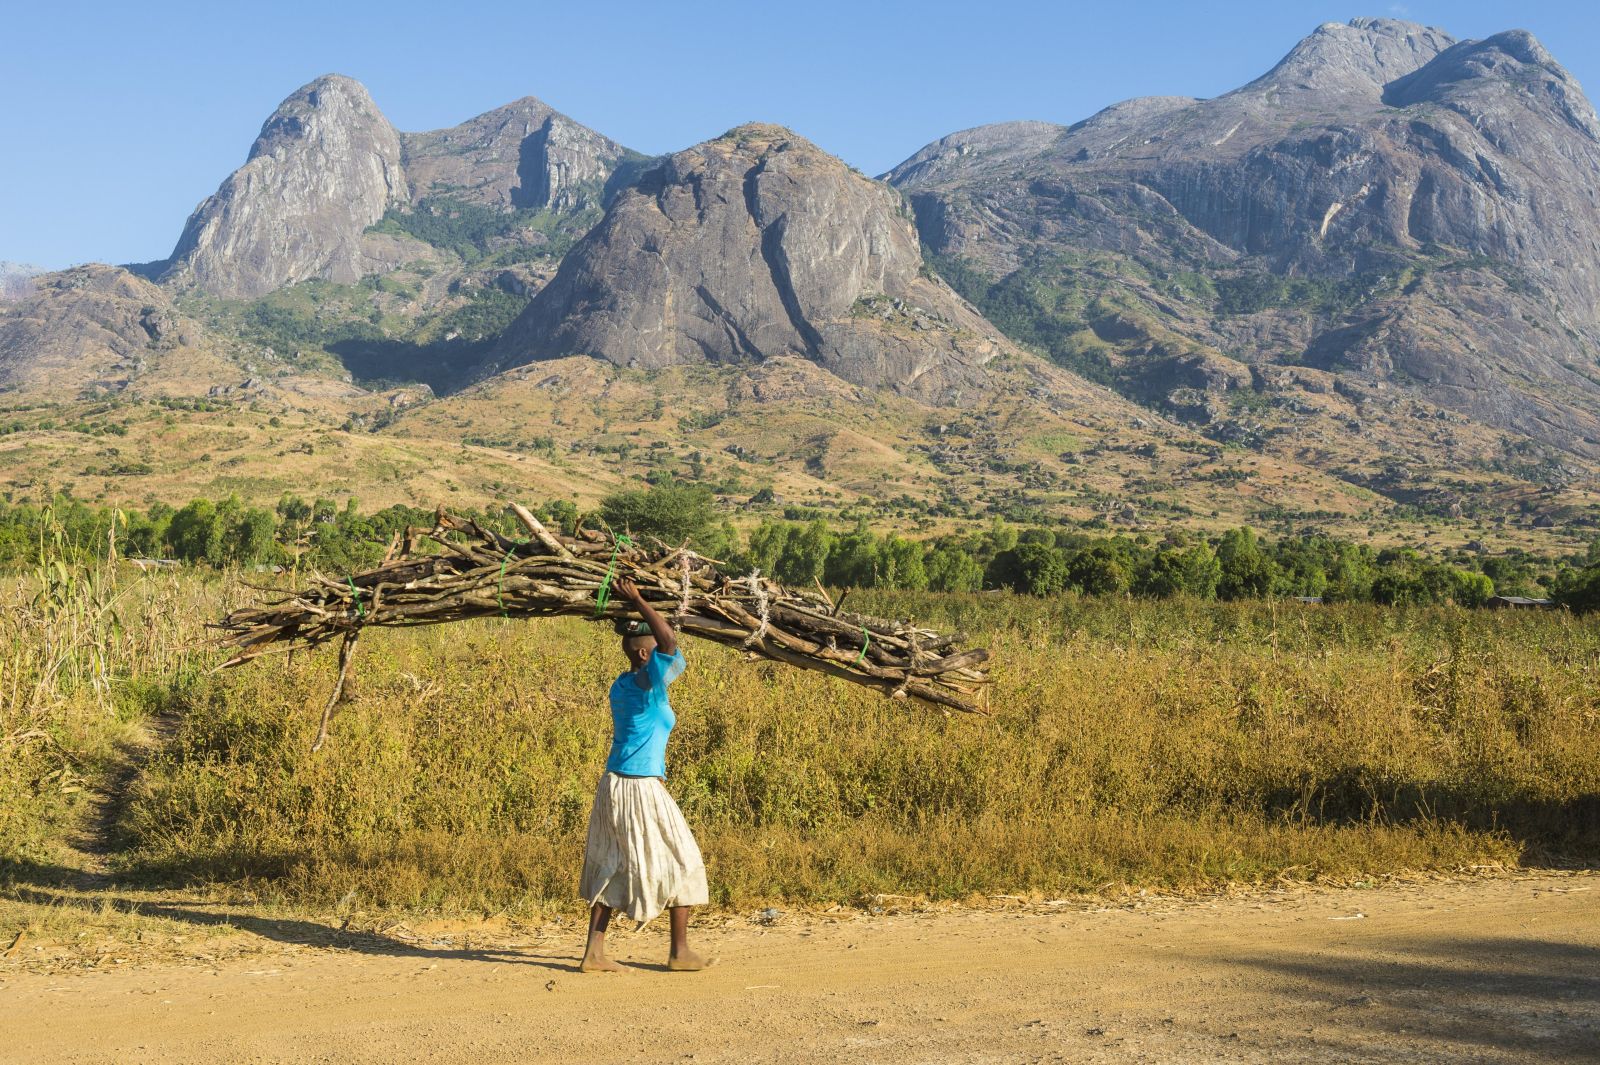 In the global south it is usually the task of women and girls to collect firewood: girl in front of Mount Mulanje in Malawi.